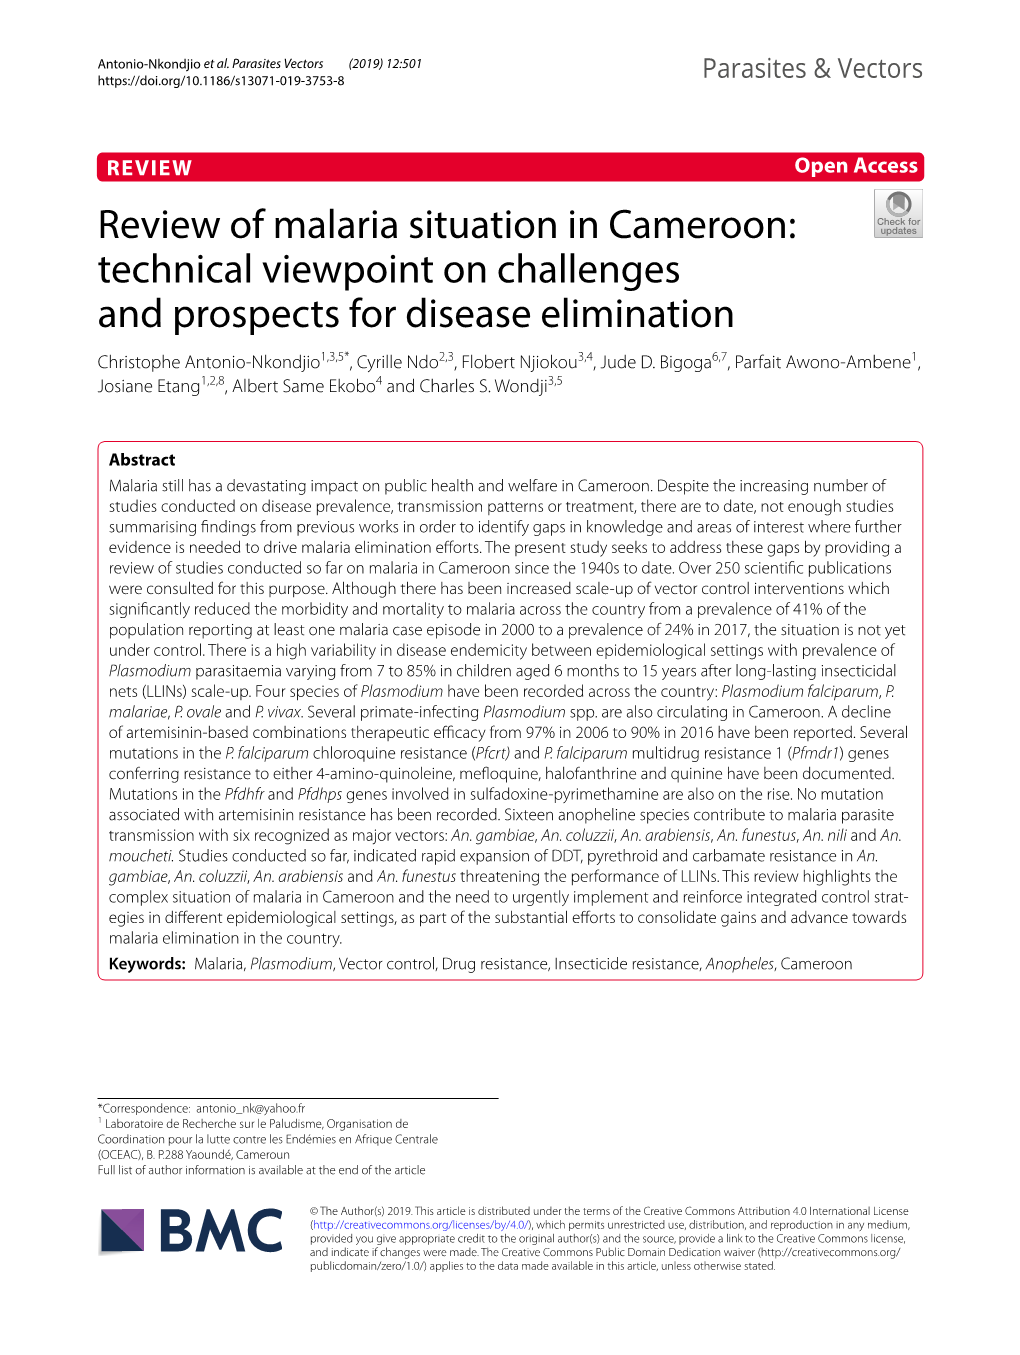 Review of Malaria Situation in Cameroon